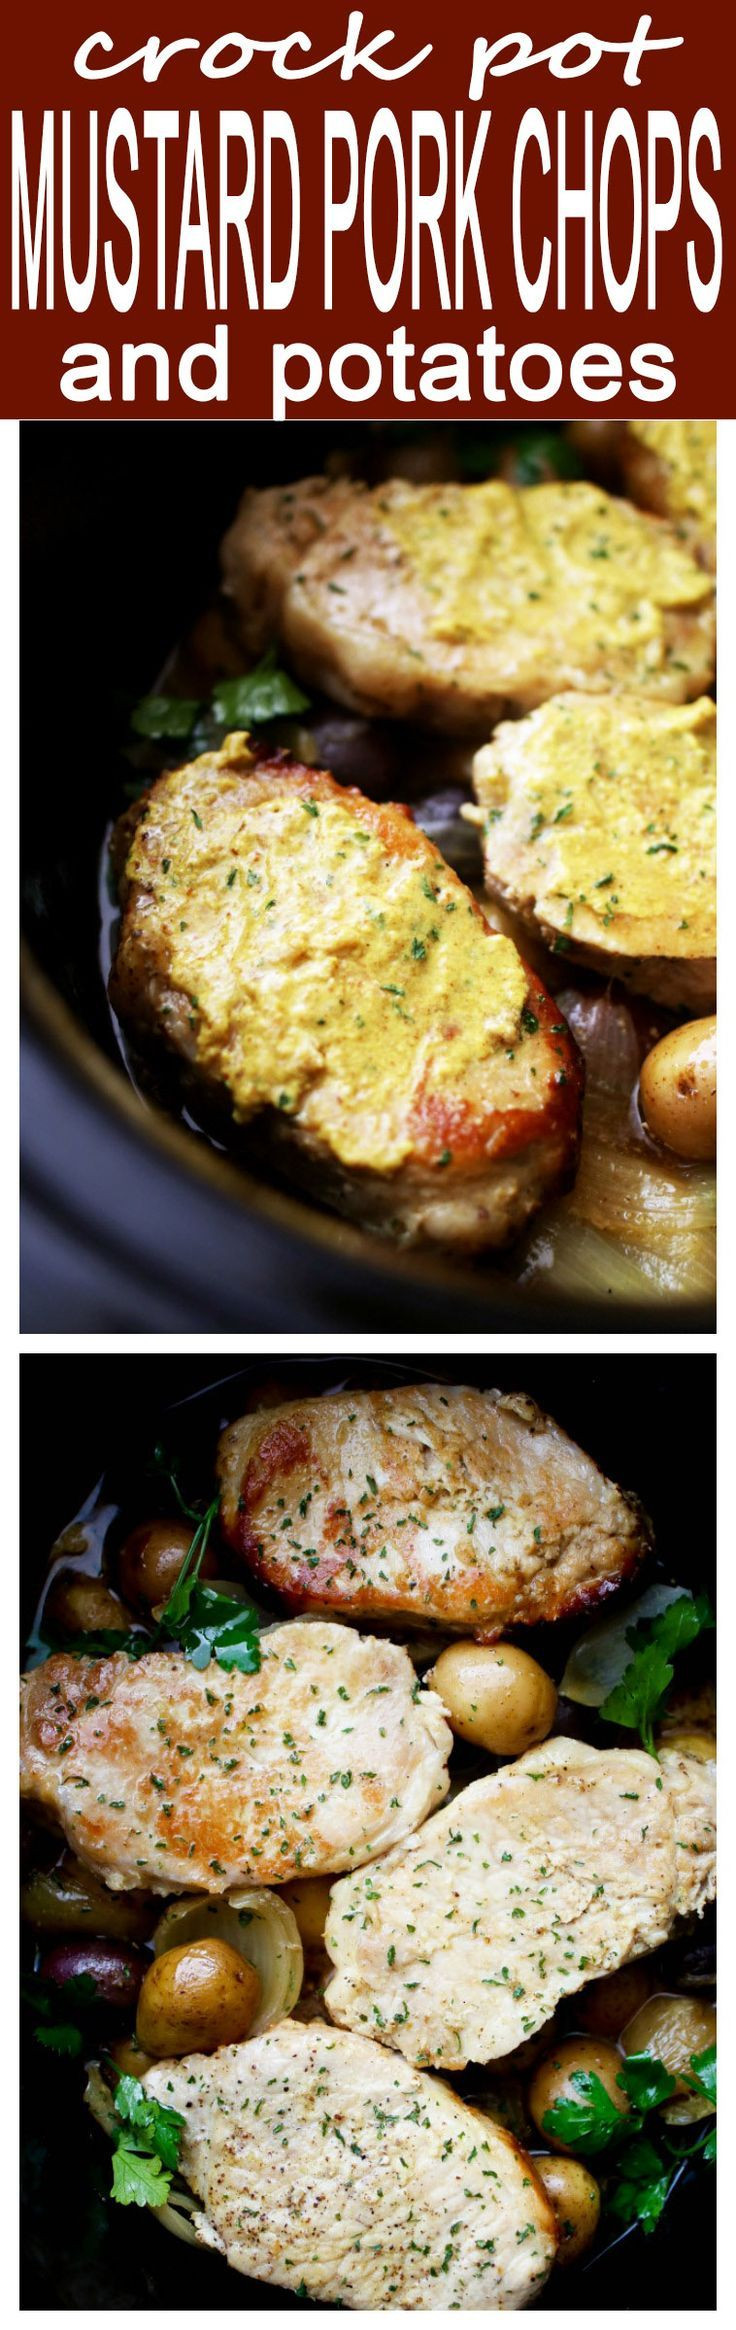 Pork Chops And Red Potatoes Slow Cooker
 Crock Pot Mustard Pork Chops and Potatoes Easy crock pot